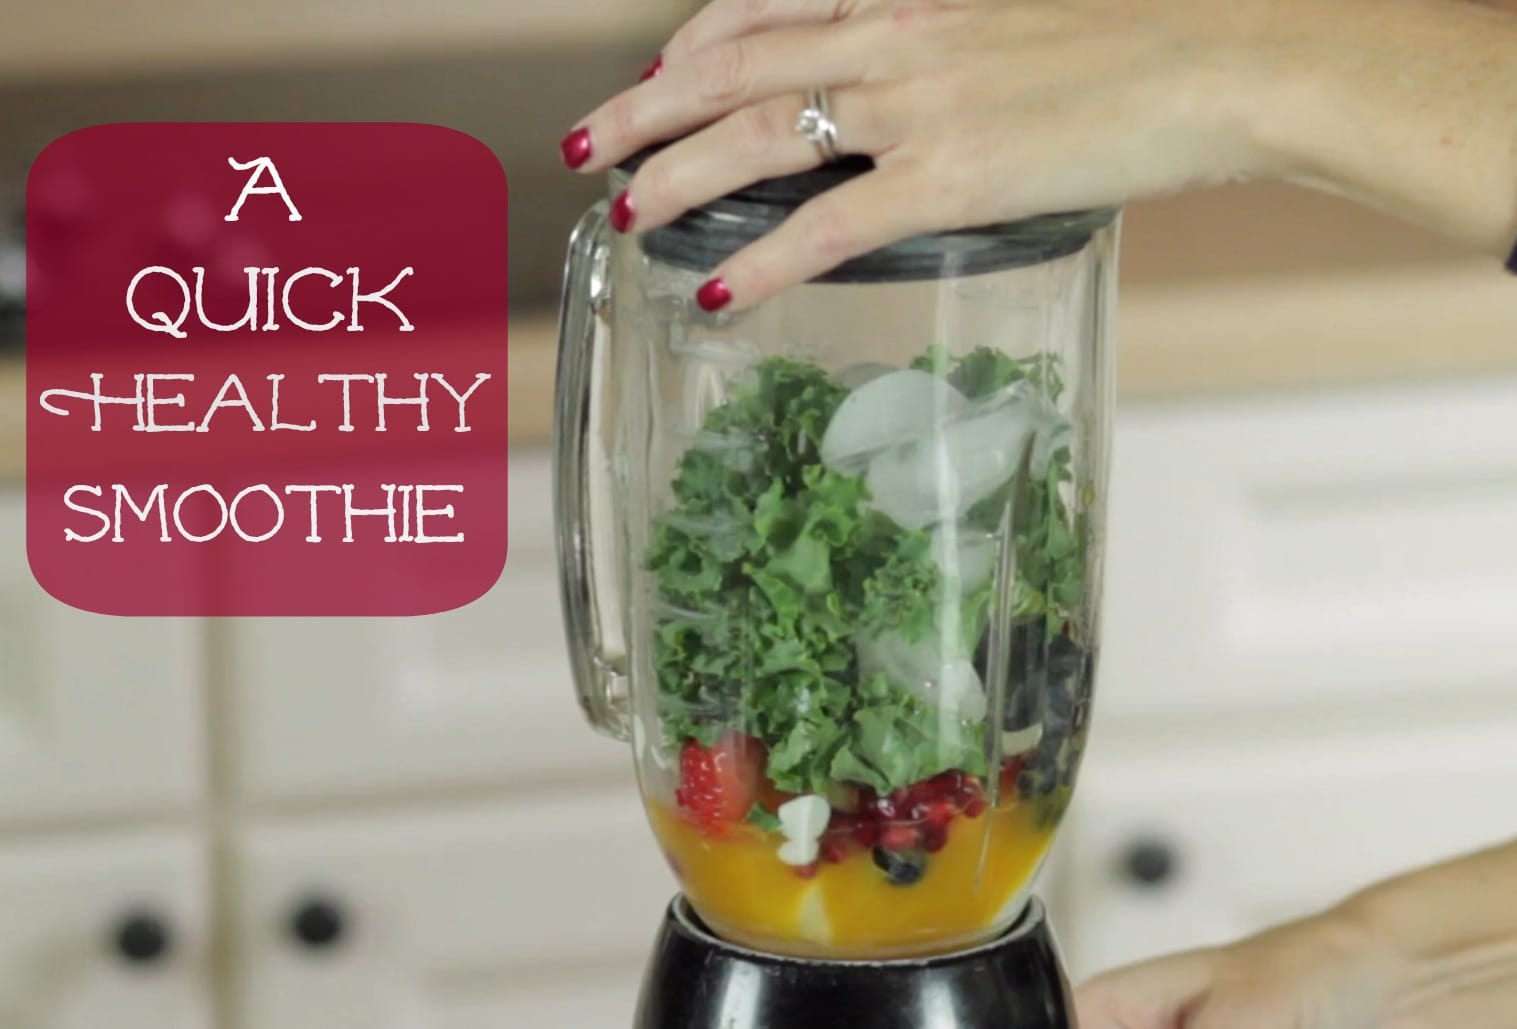 Style in Life Smoothie Http://www.ExtraordinaryMommy.com